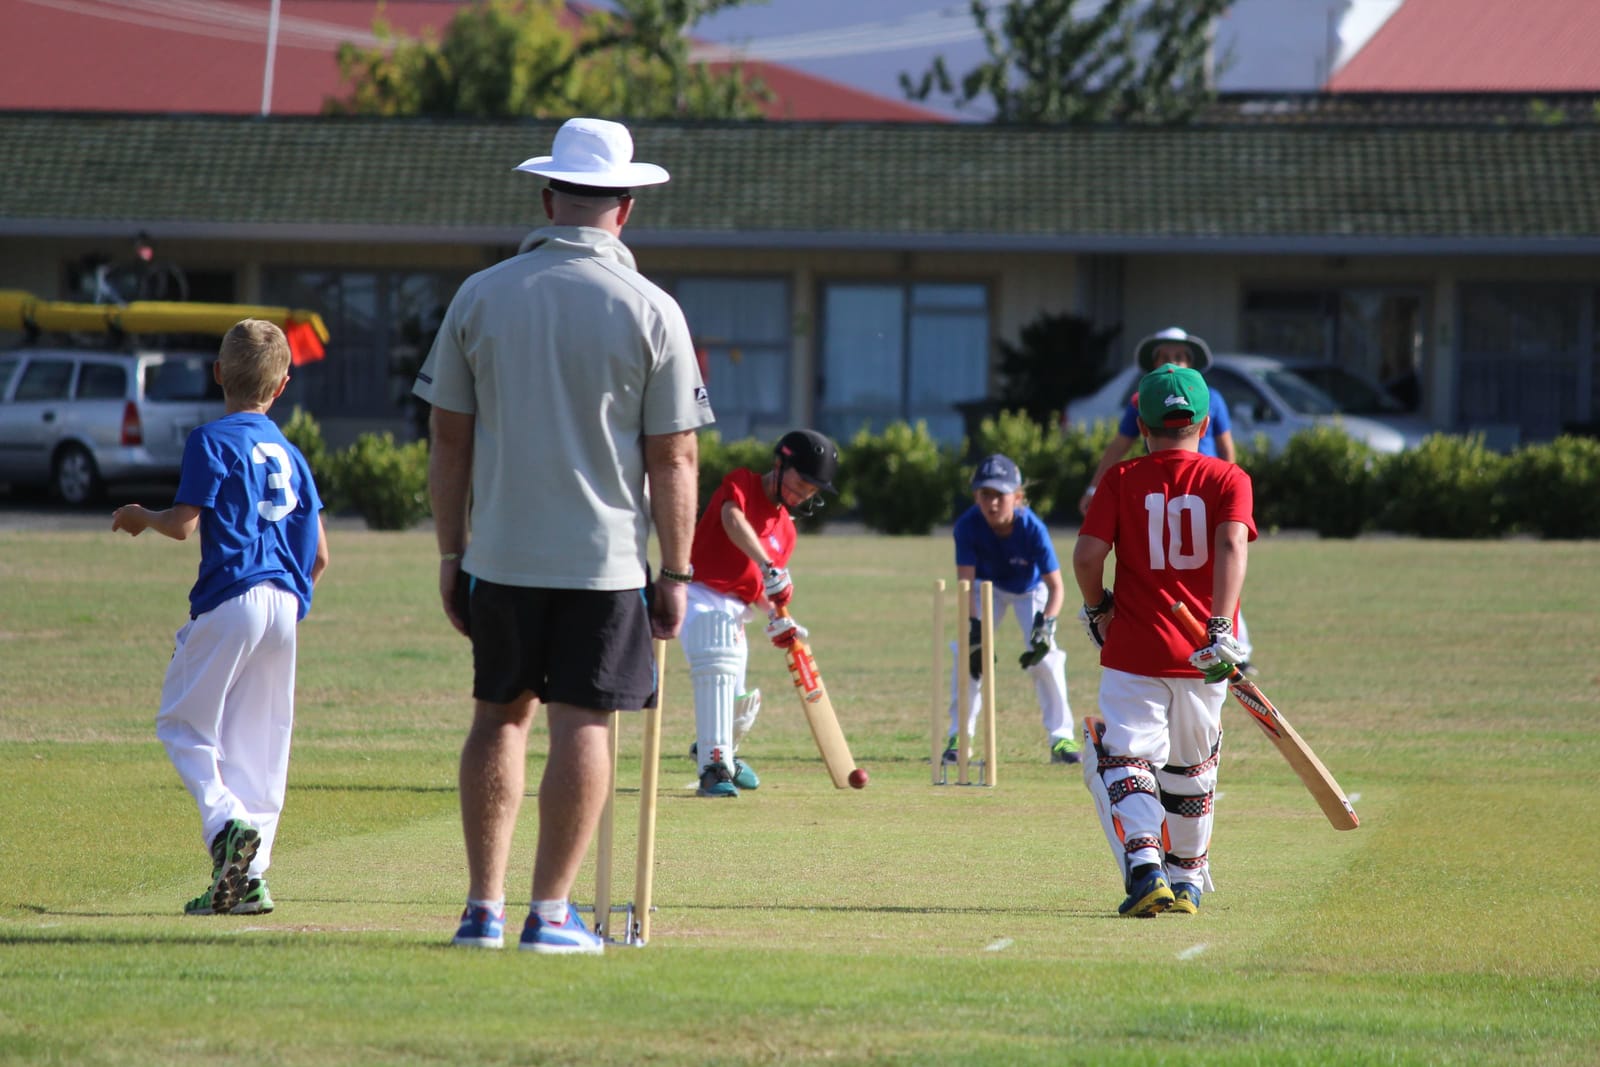 Taupo Cricket Club embraces the fun for all message